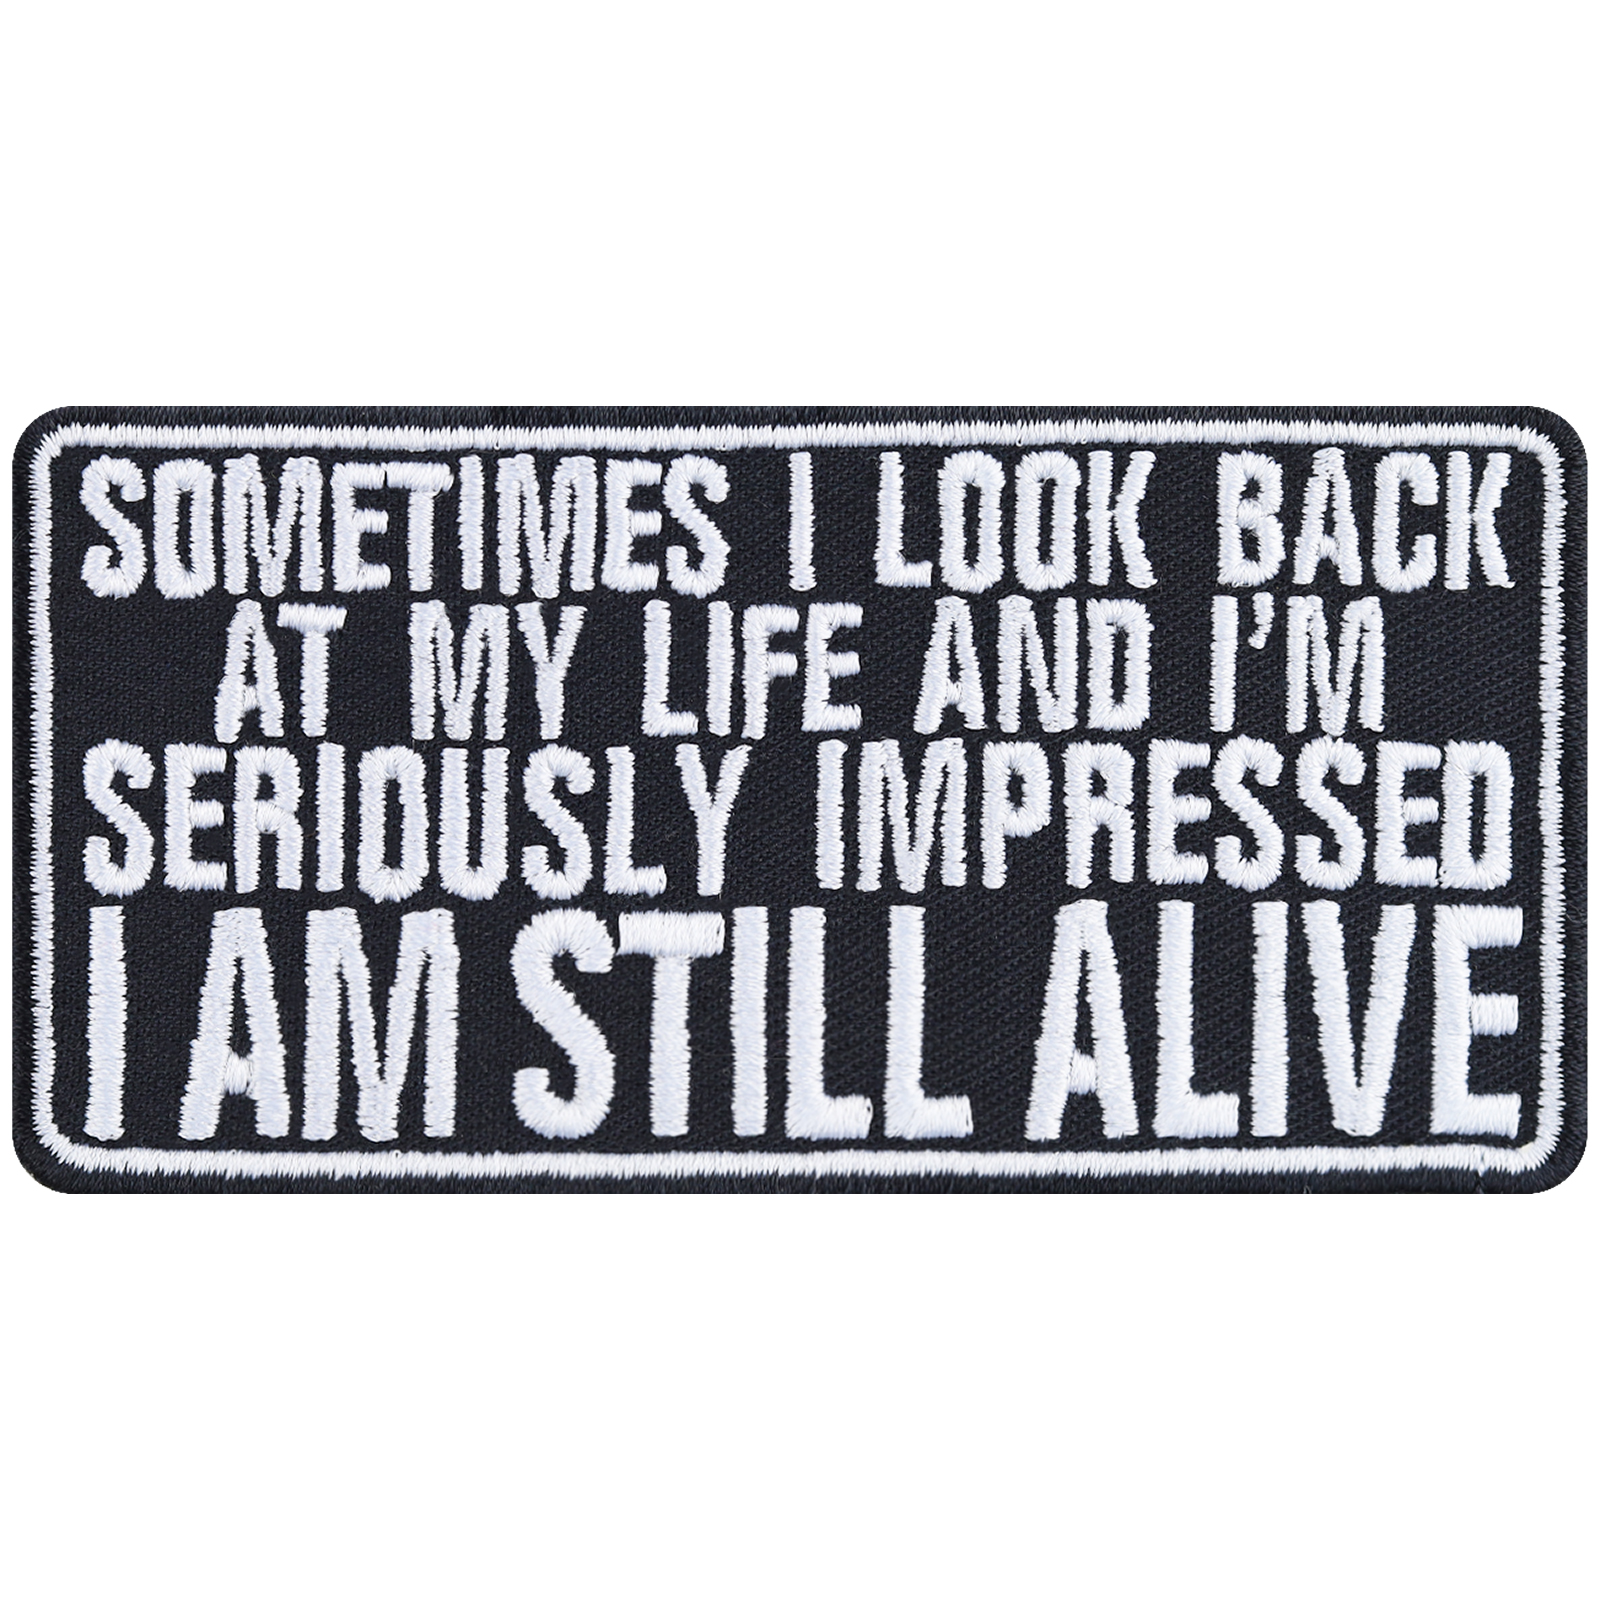 Sometimes I look back at my life and I'm seriously impressed - I am still alive - Patch